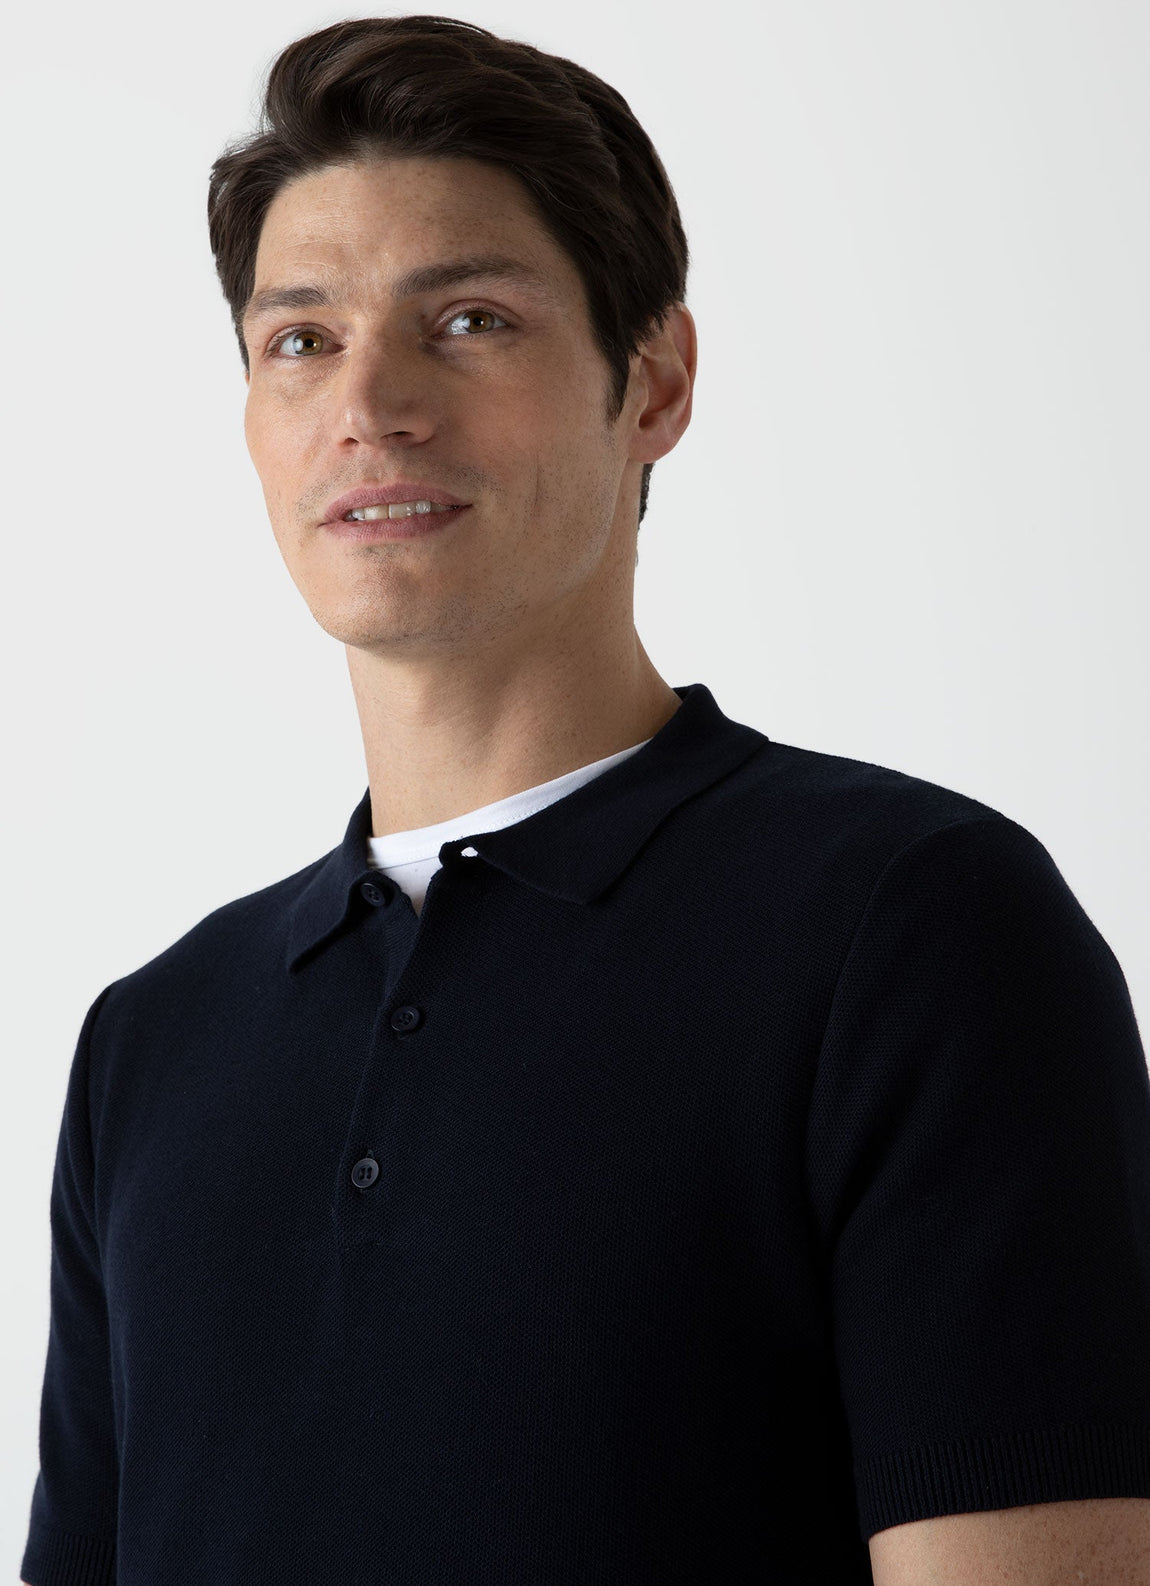 Men's Knit Polo Shirt in Navy